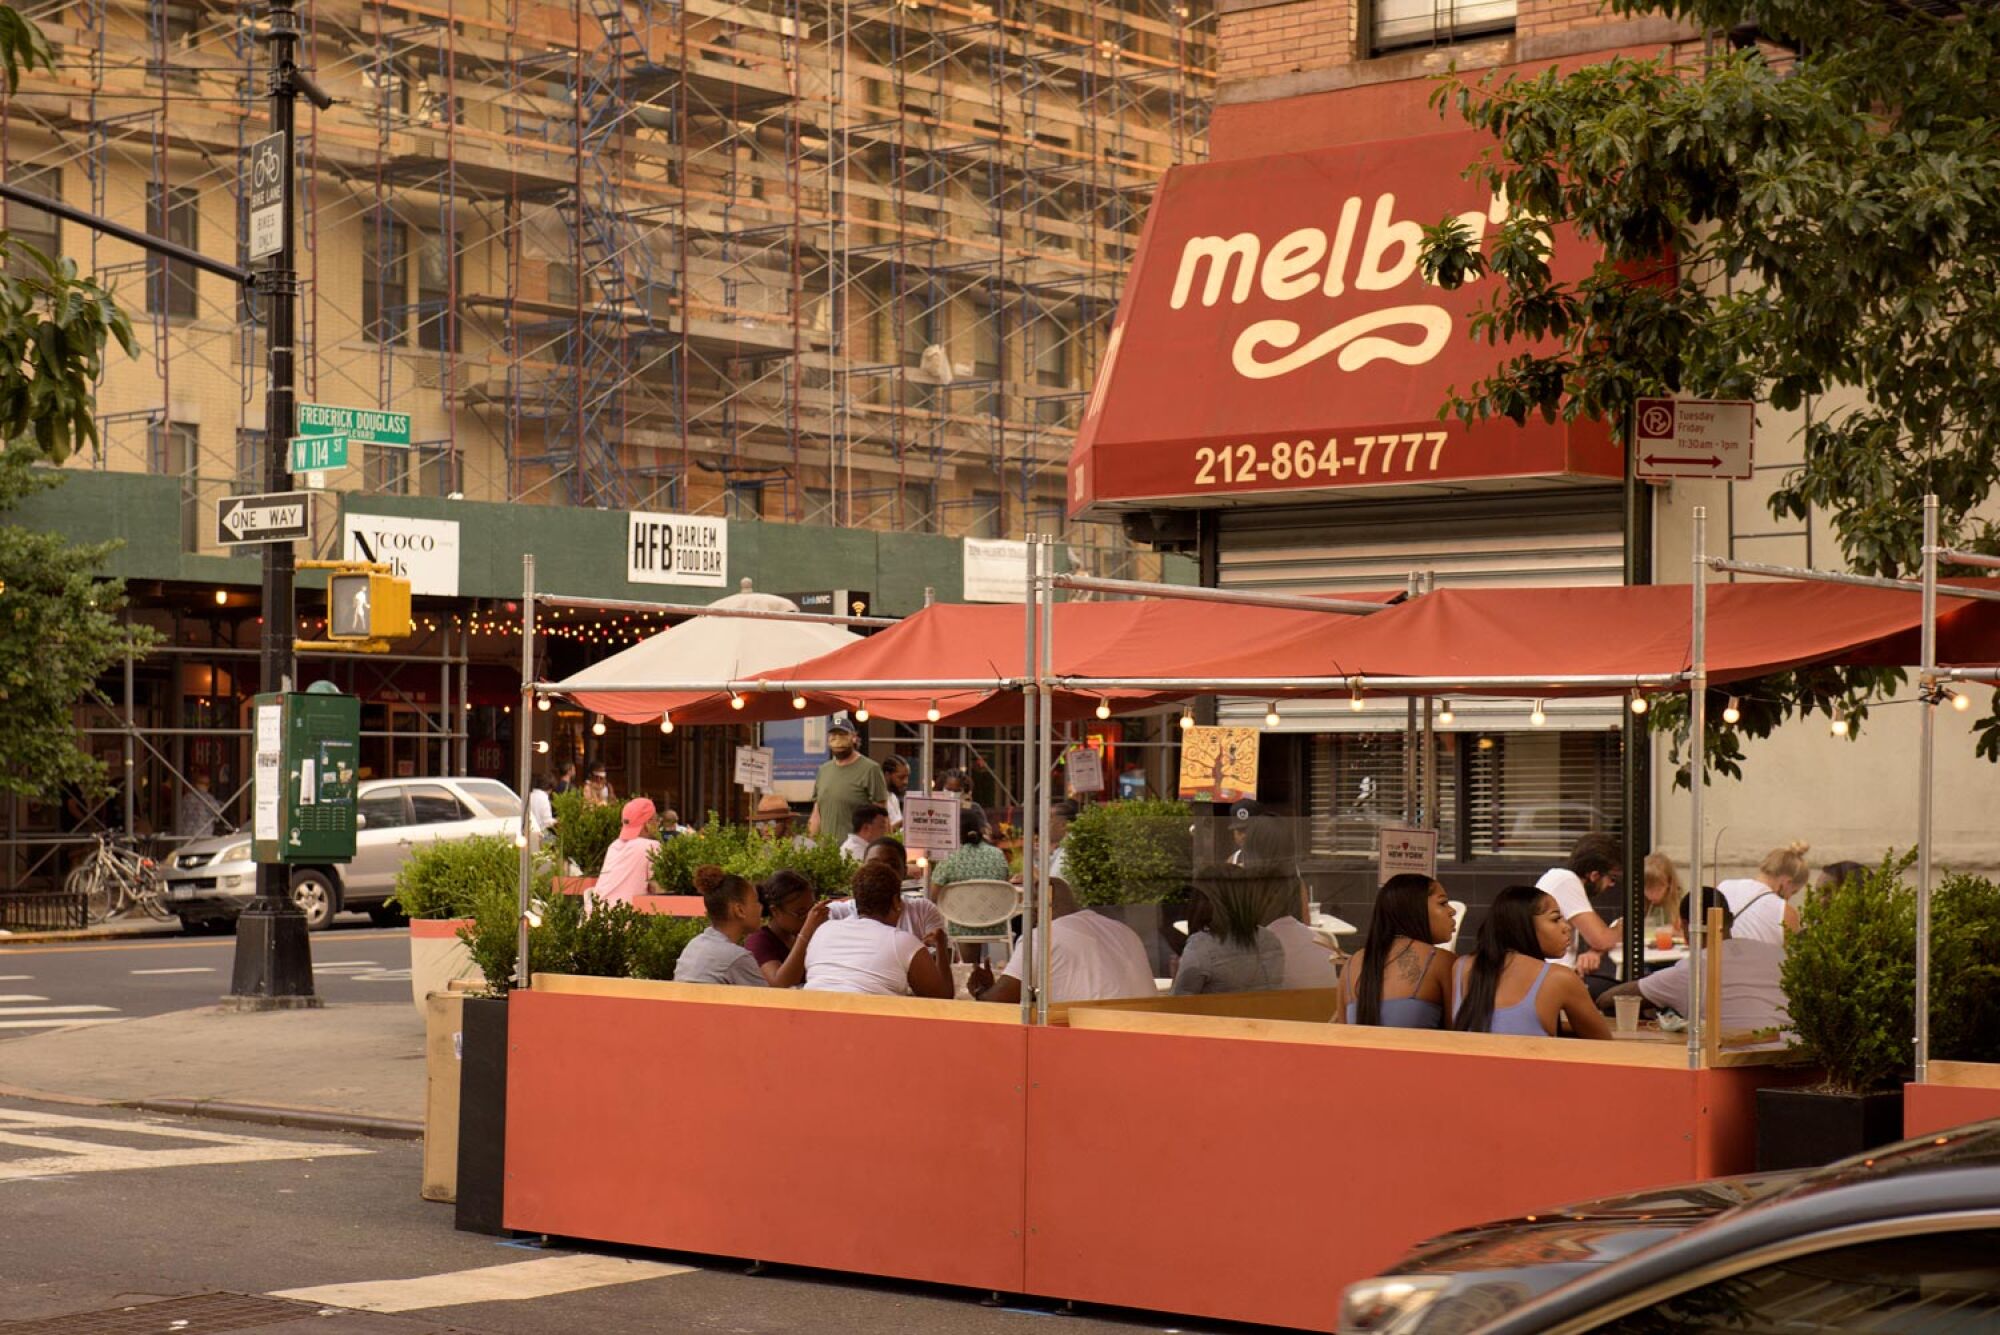 Melba's, one of the Dine Out participants with open-air seating in New York.